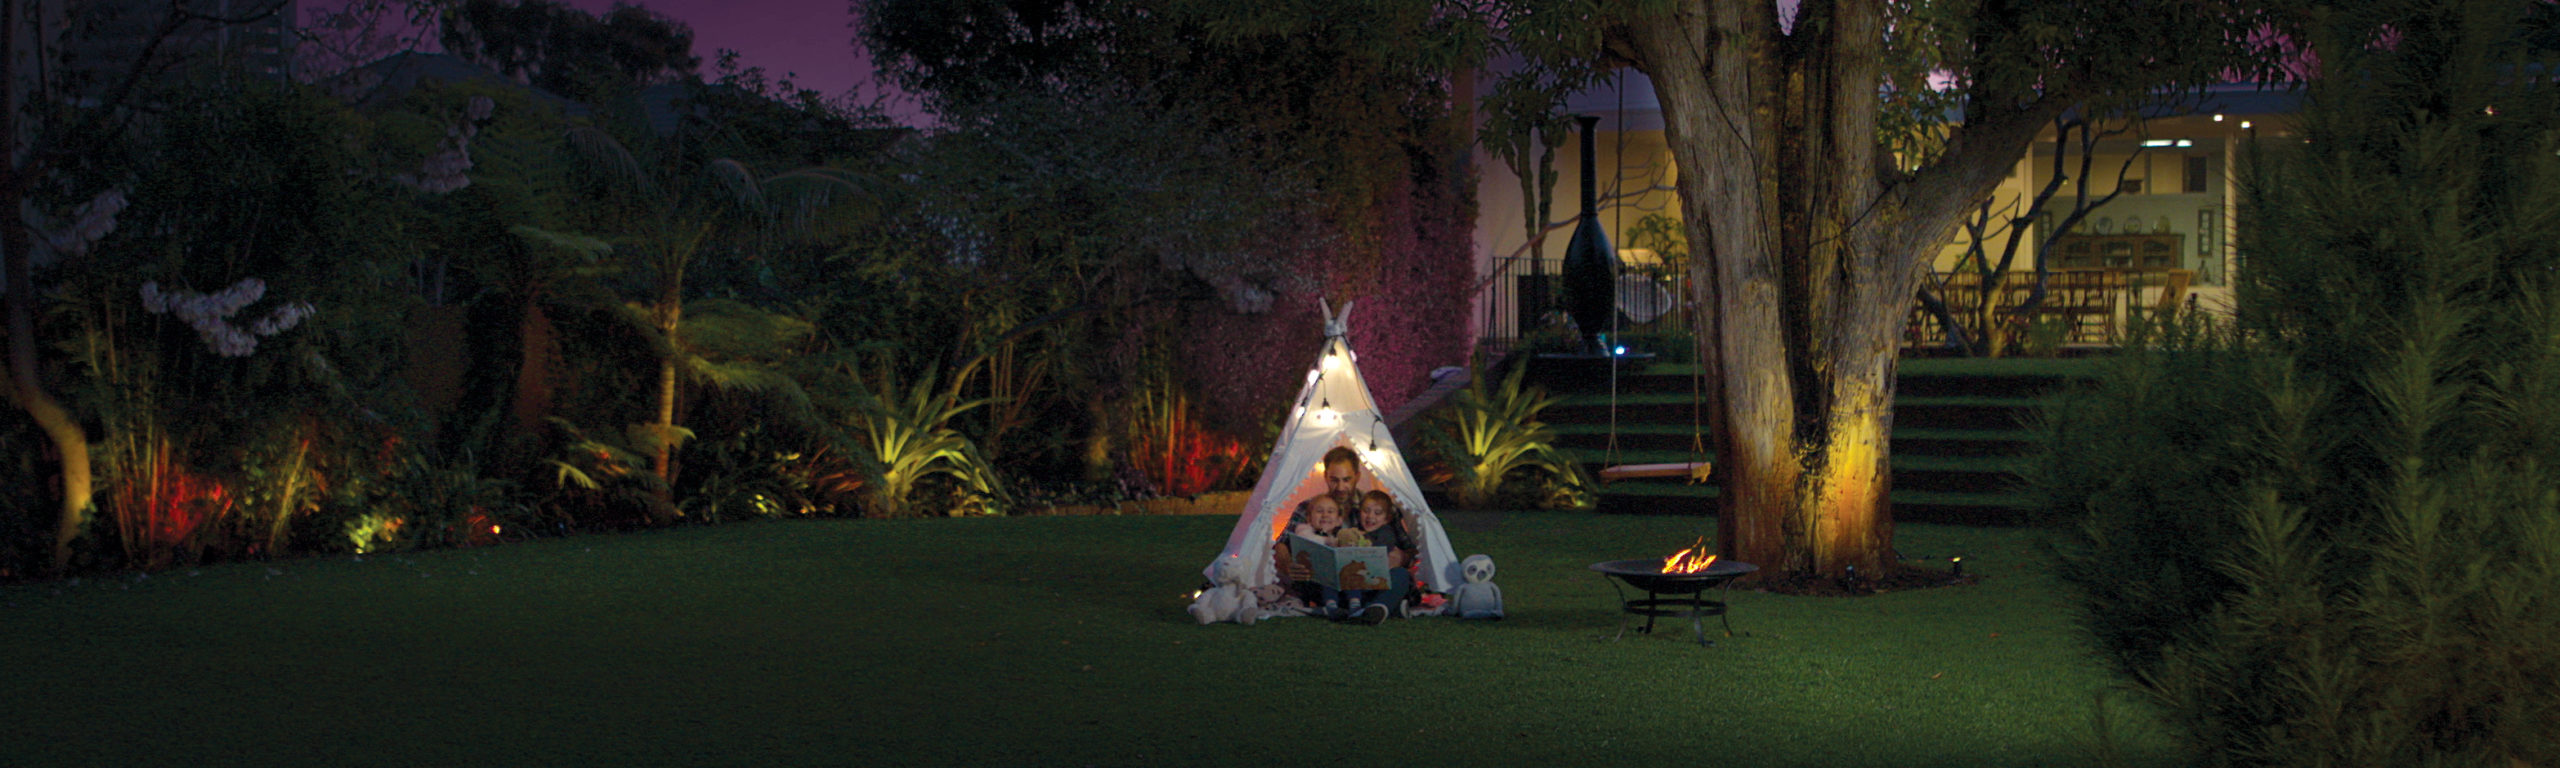 fathers-day-garden-light-header-image